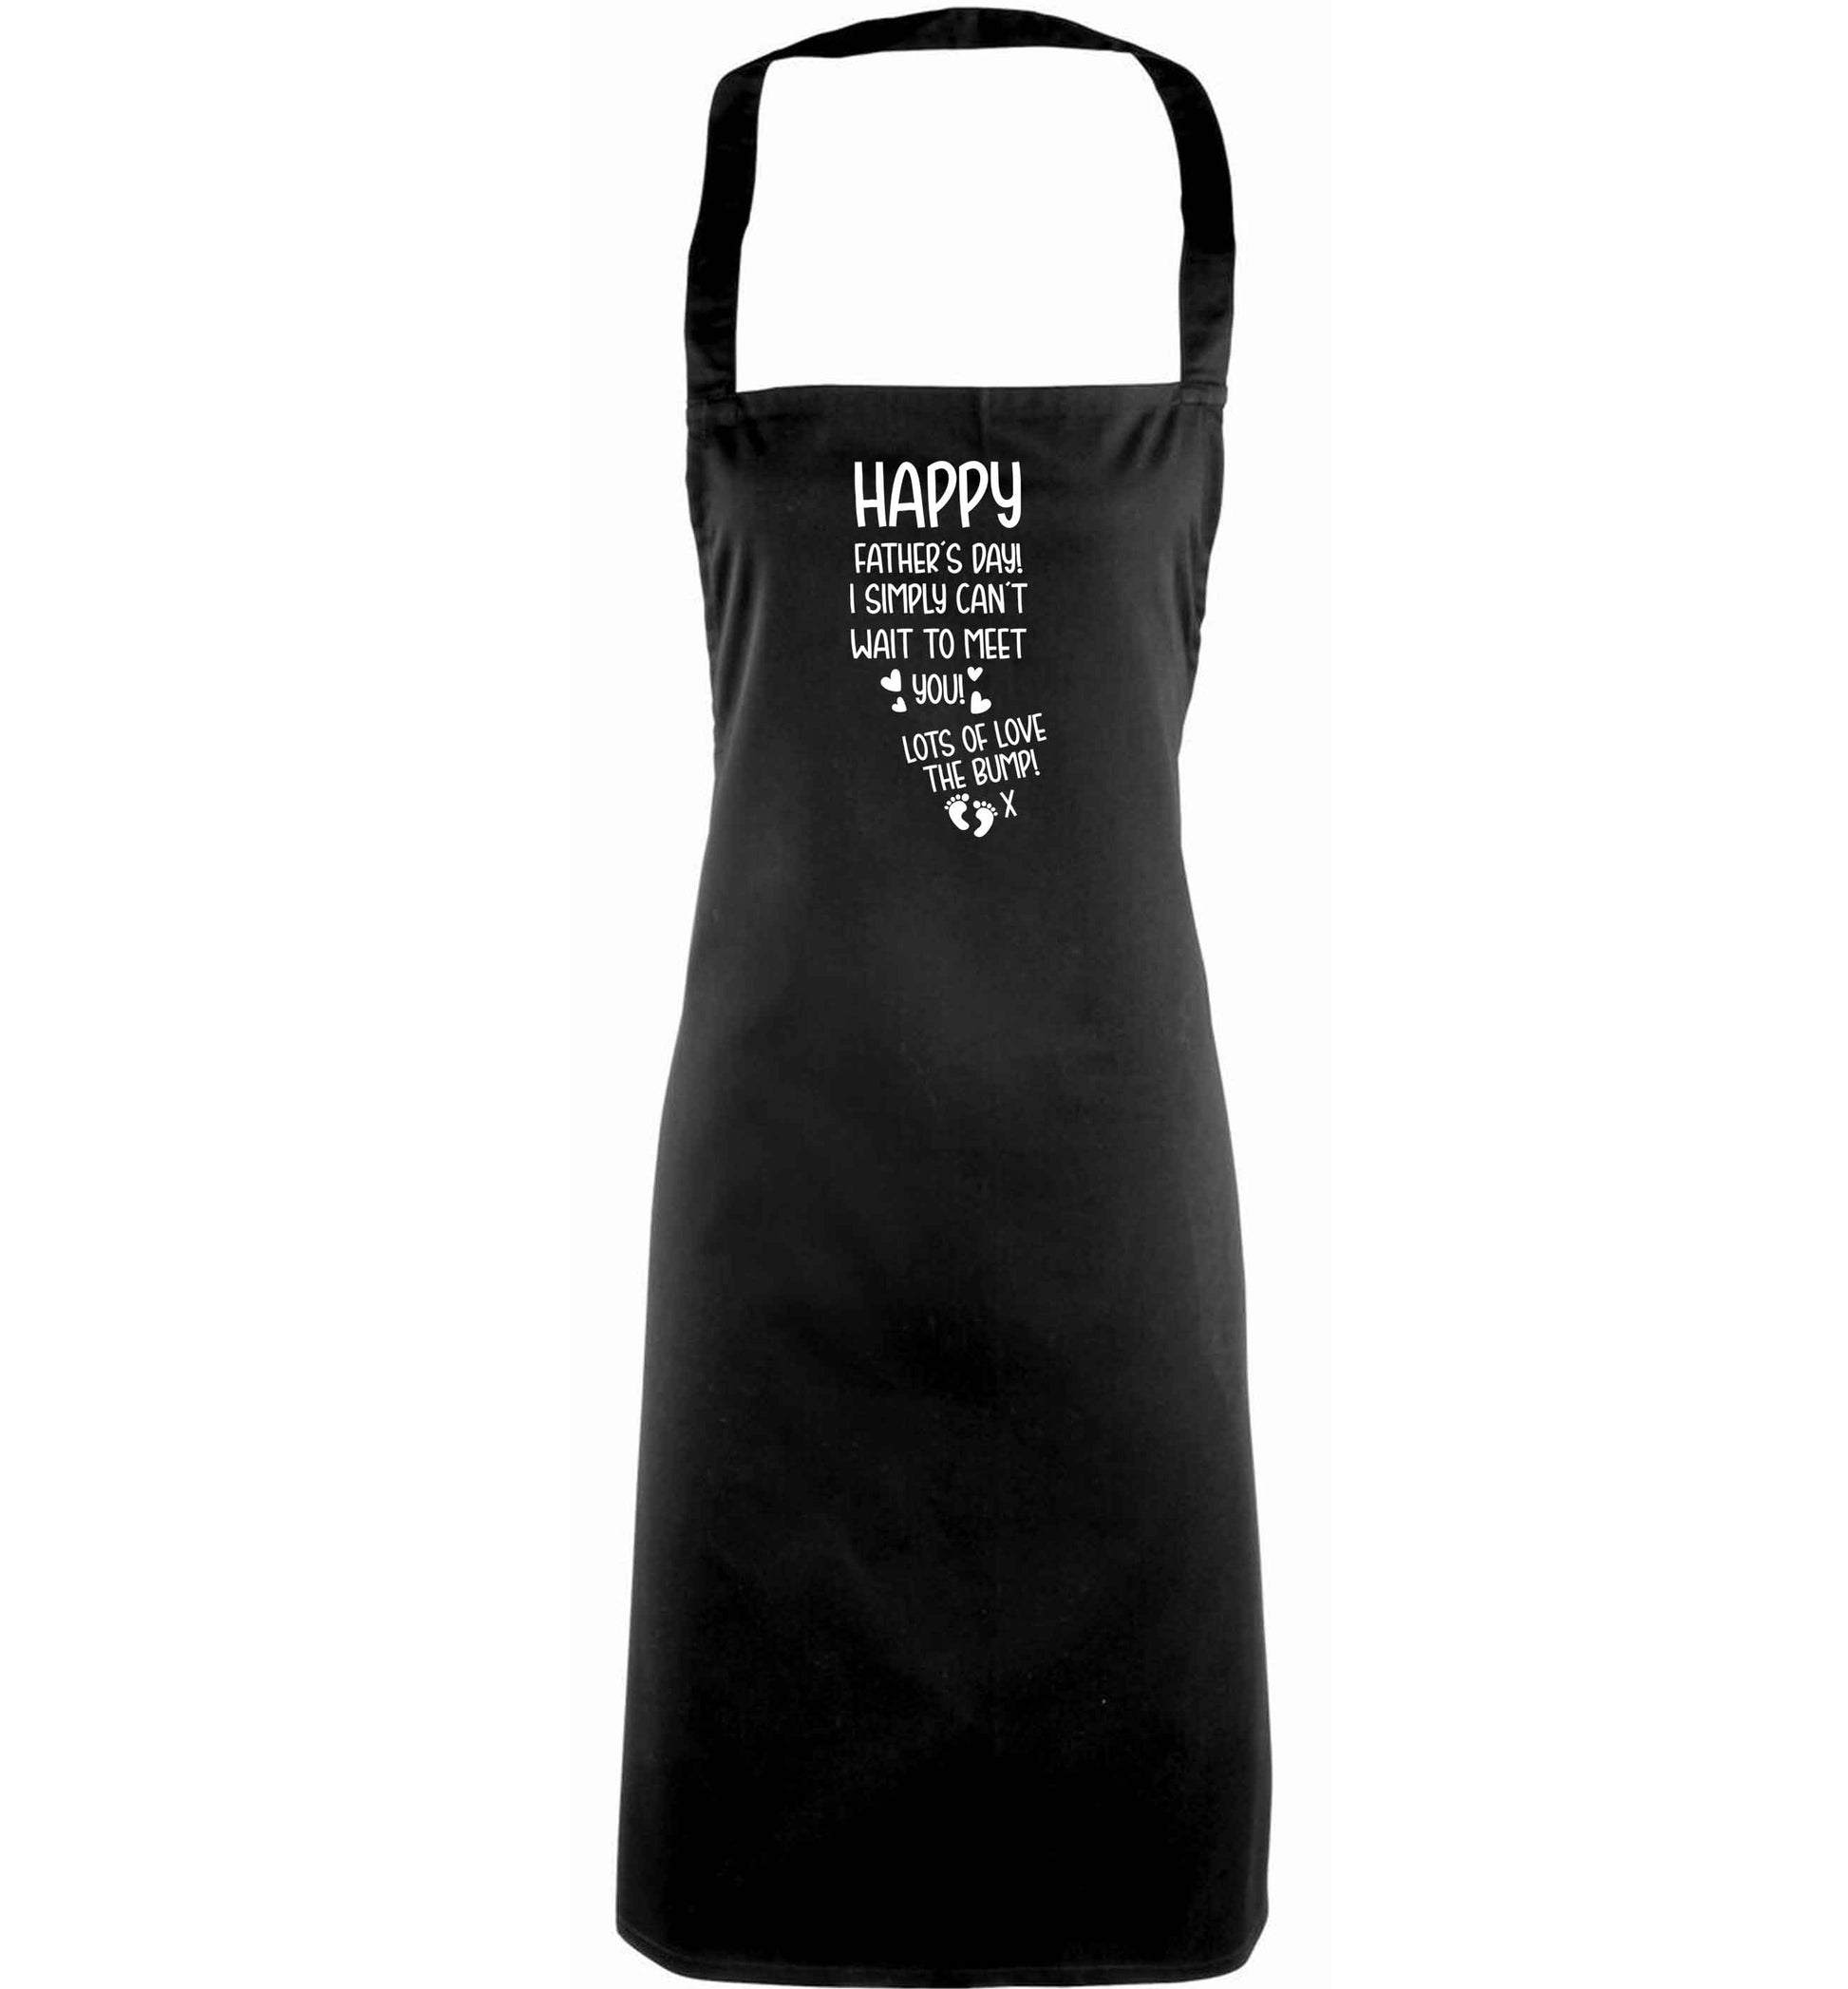 Happy Father's day daddy I can't wait to meet you lot's of love the bump! adults black apron